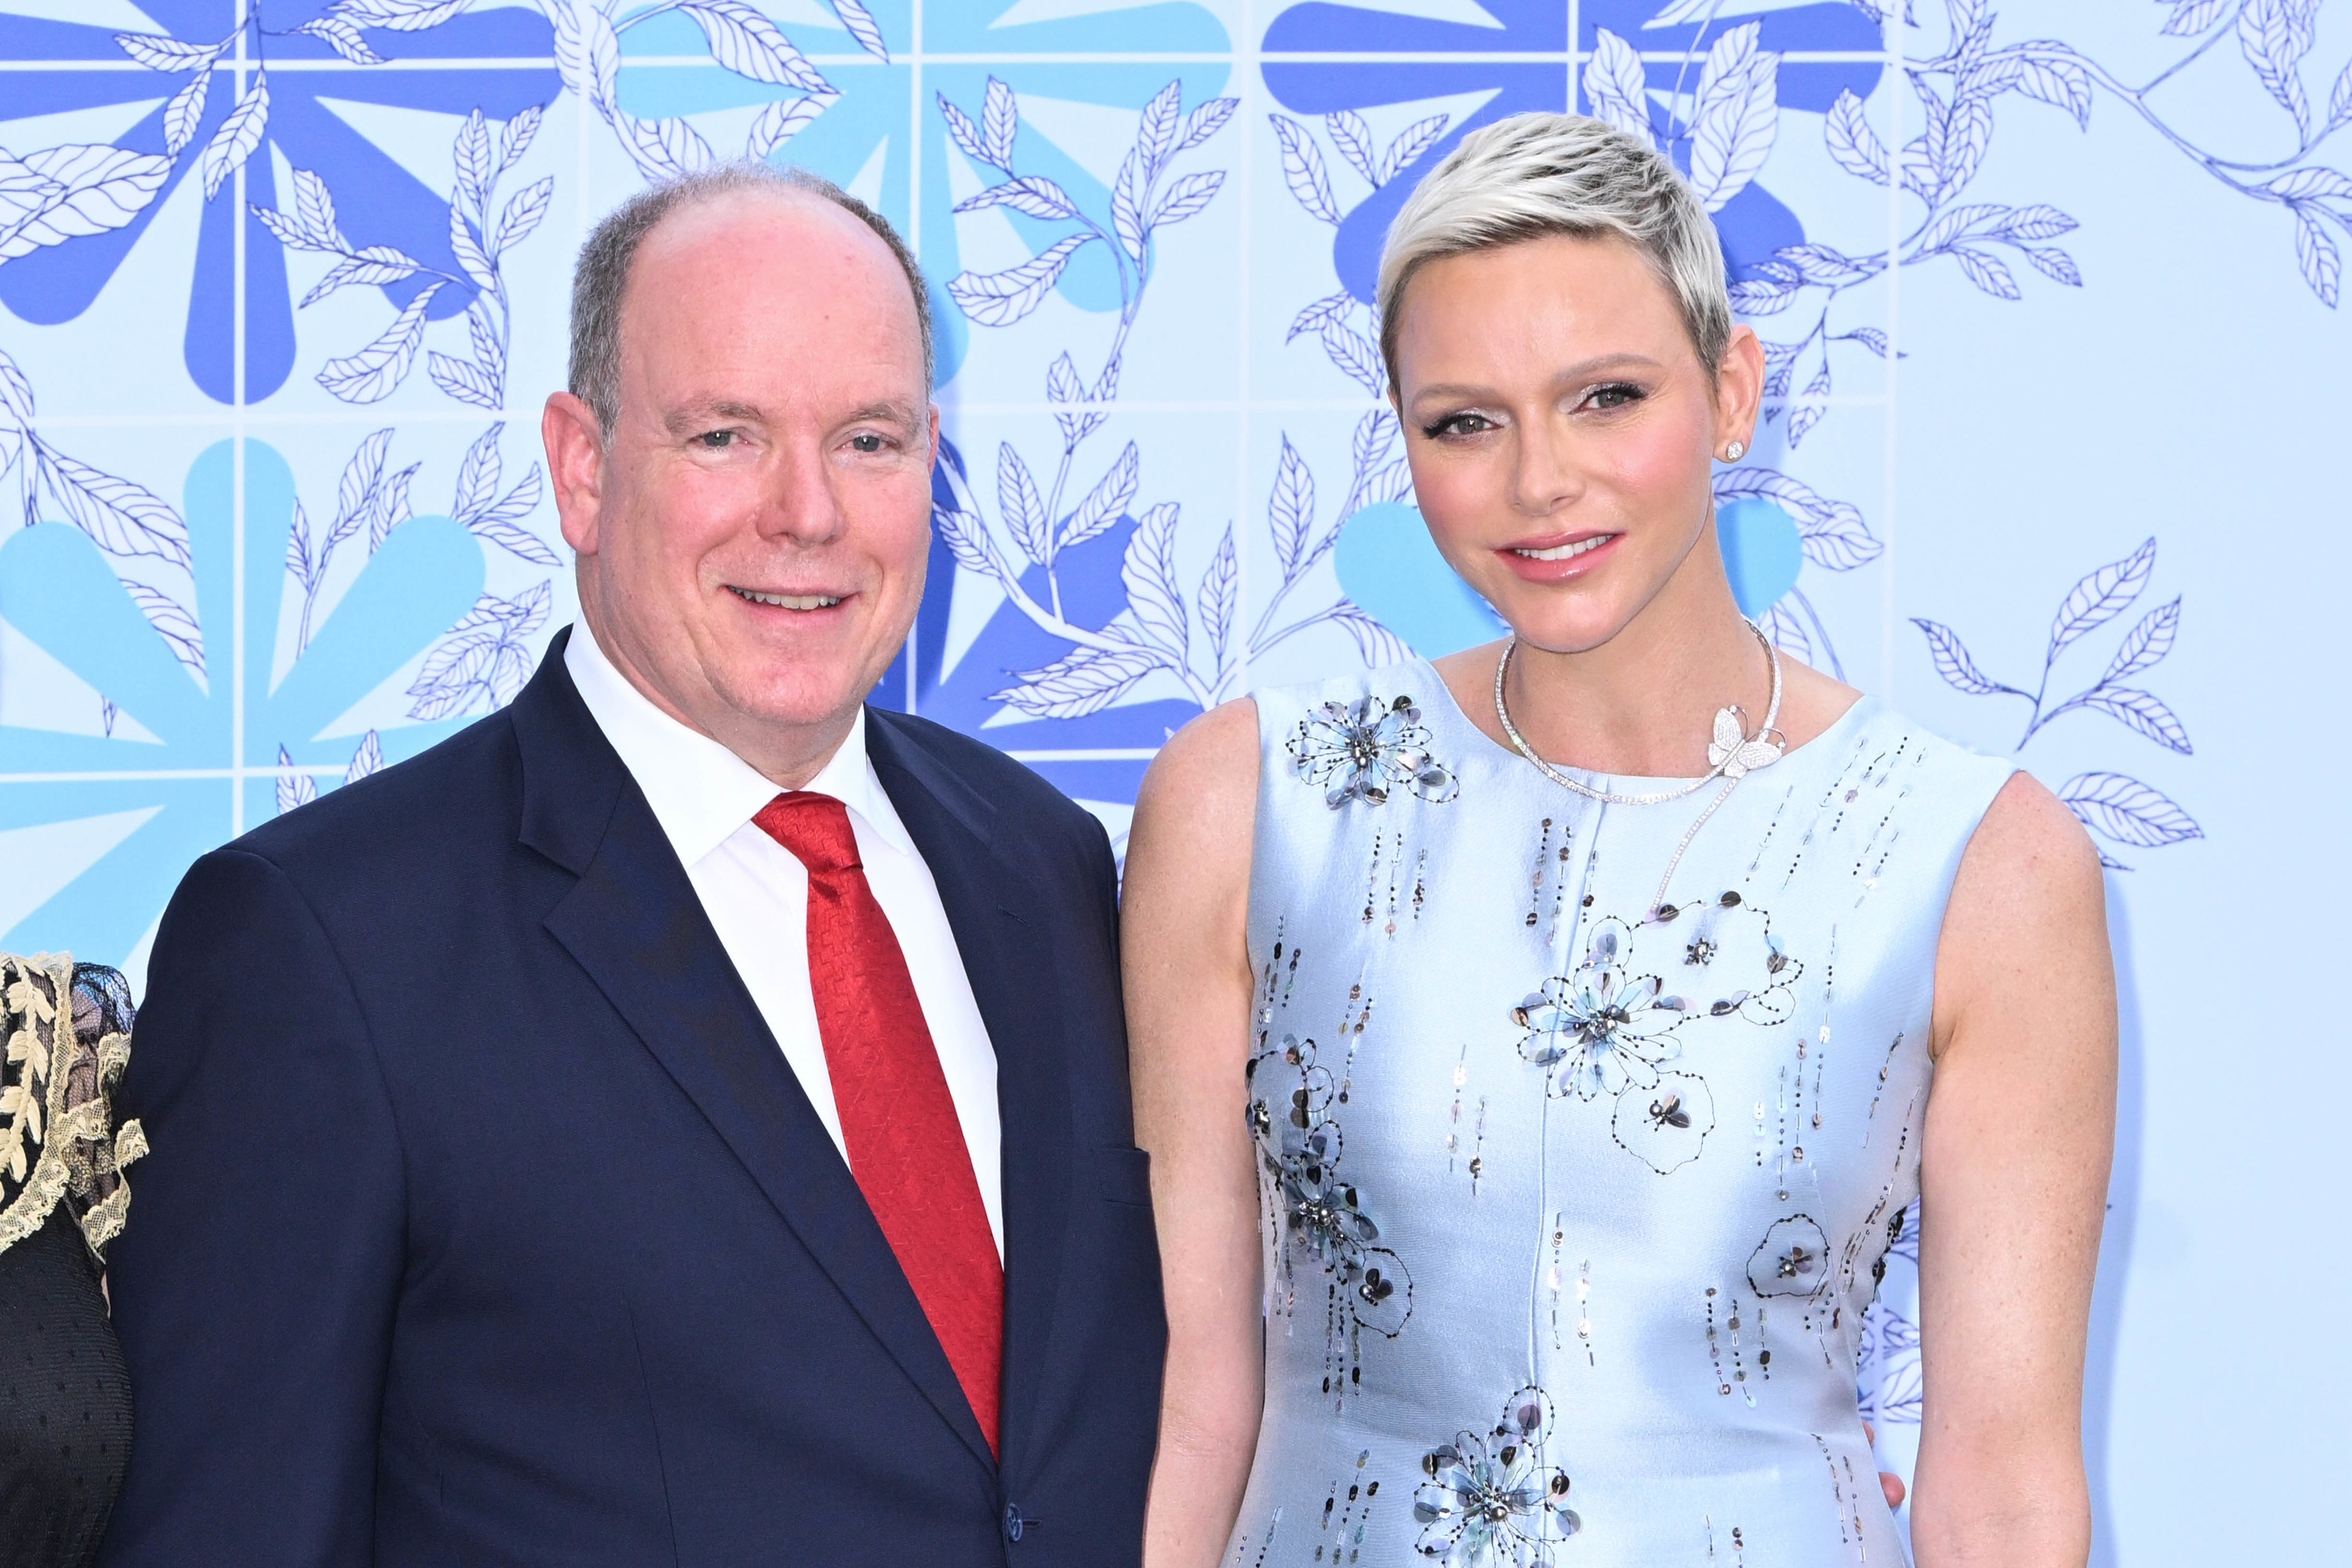 Prince Albert II and Princess Charlene standing next to each other and smiling